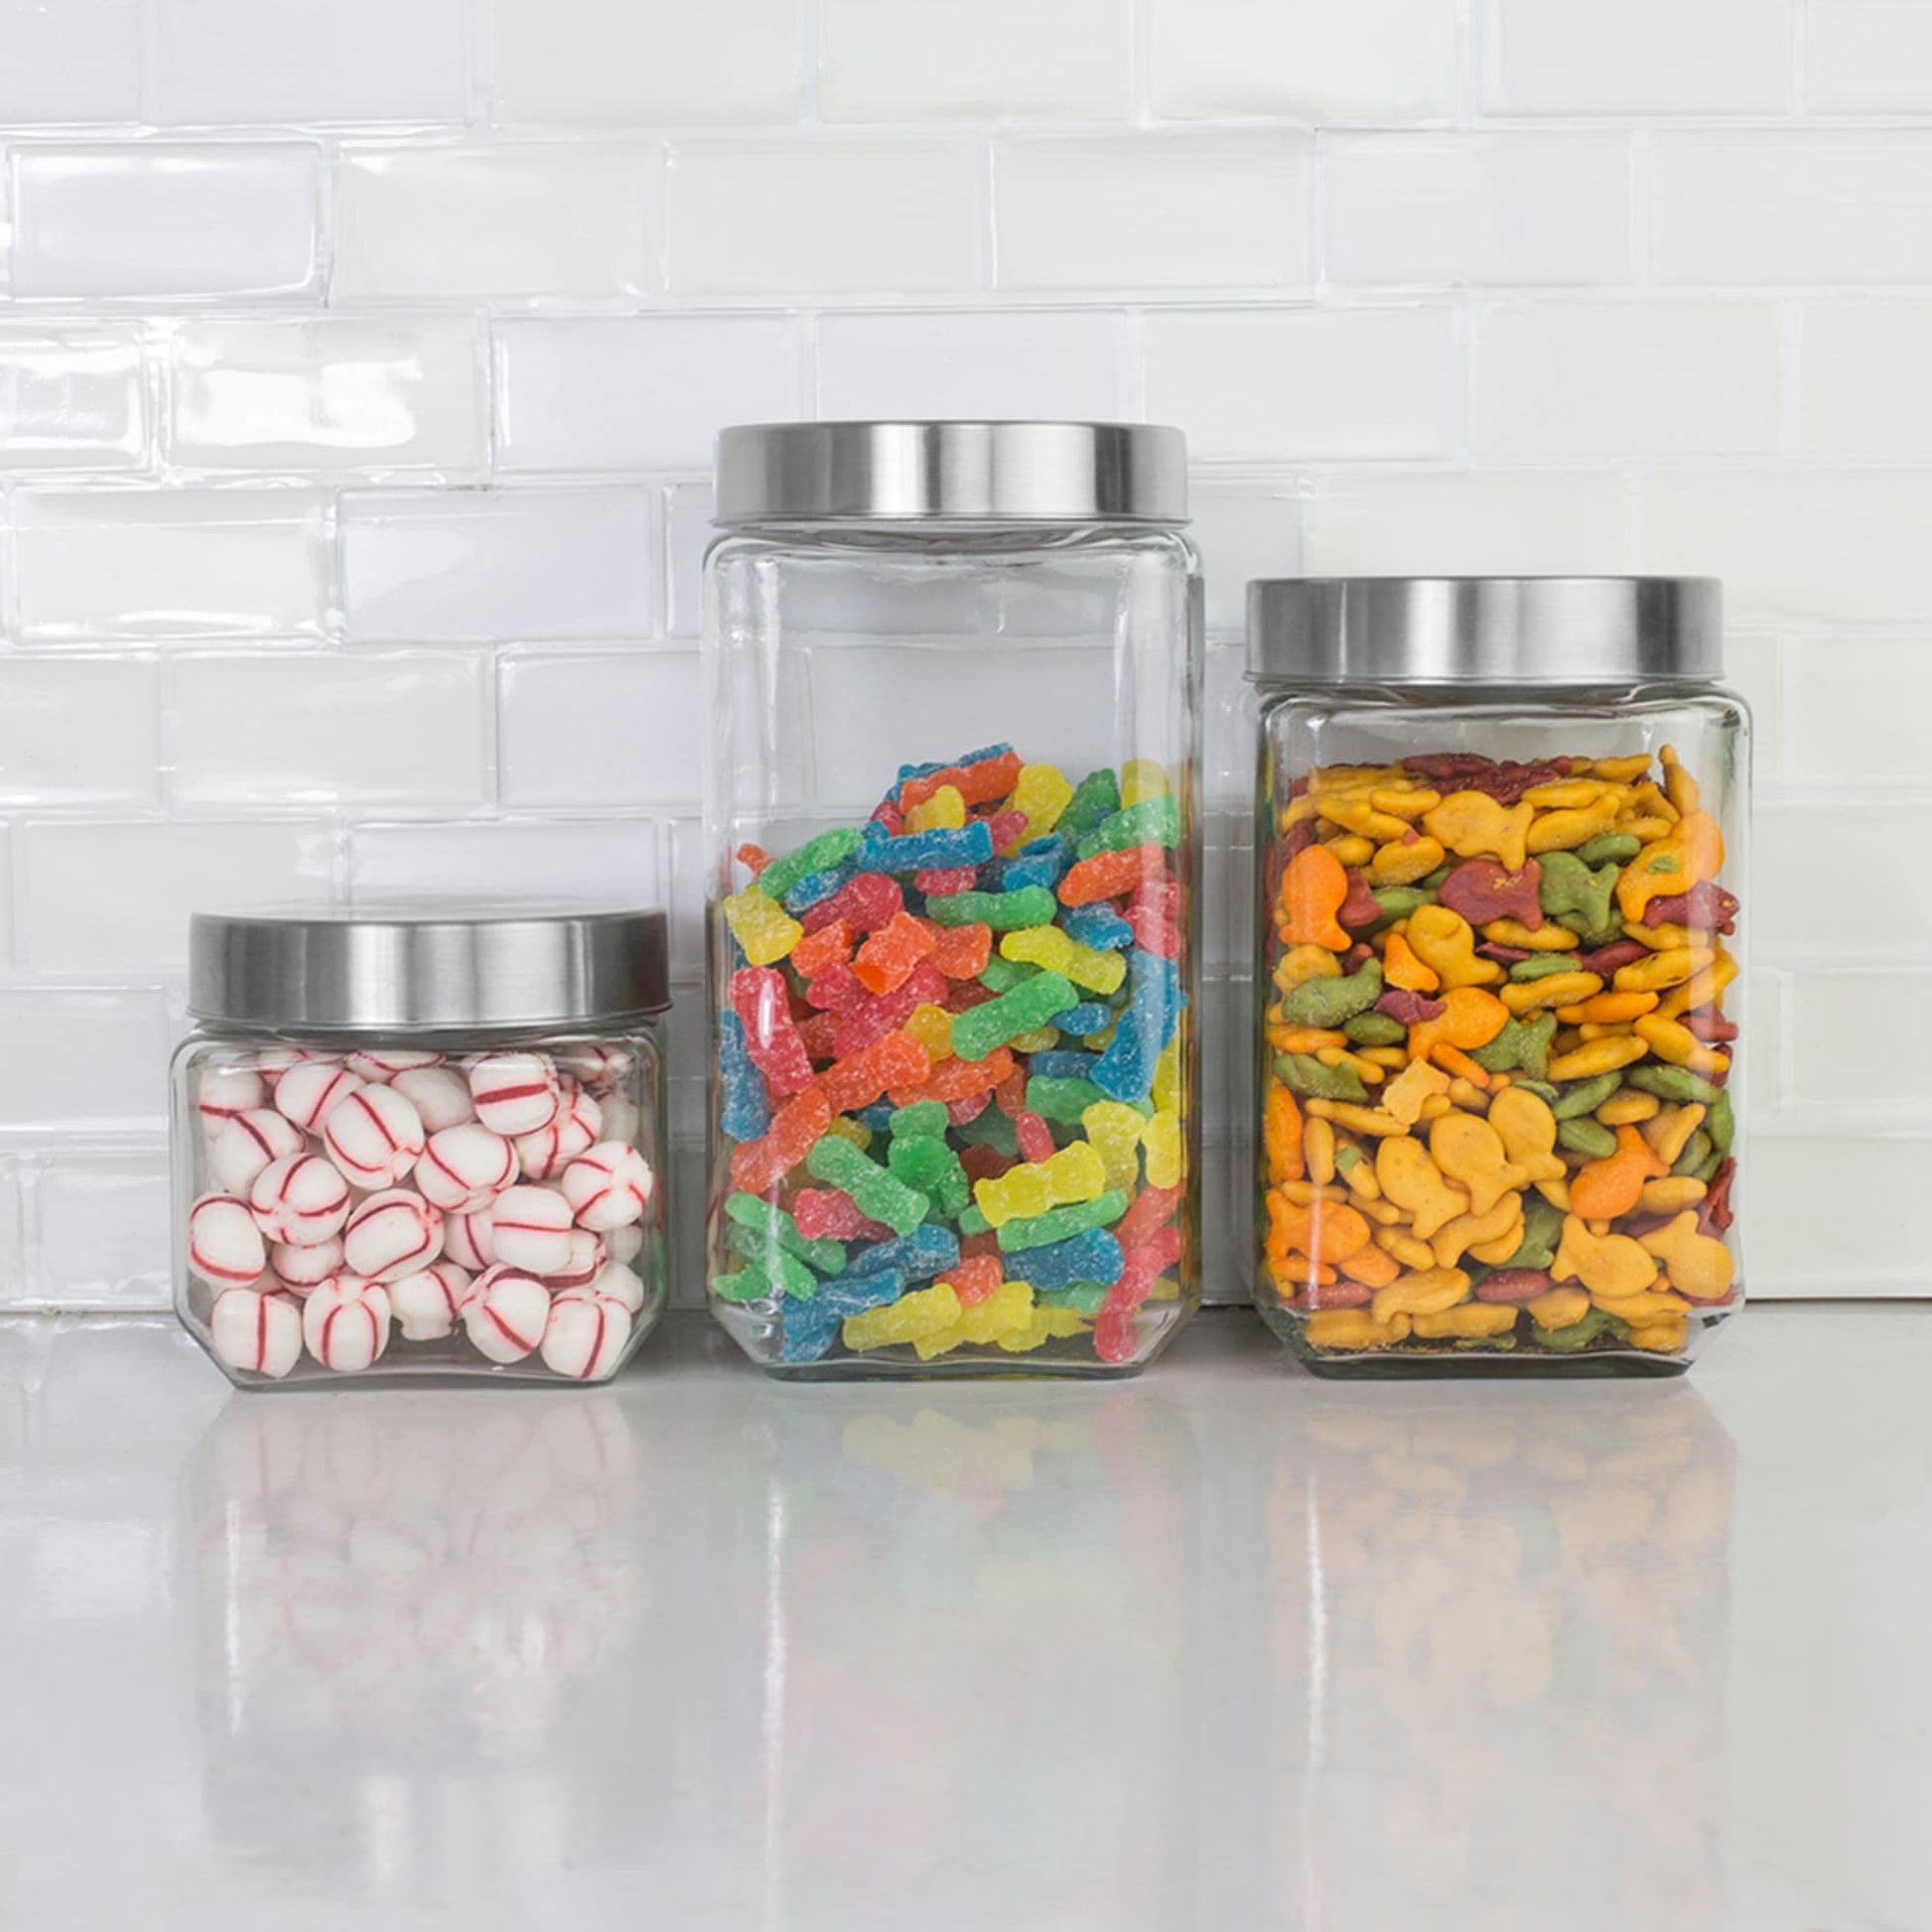 Air-Tight Twist Top Lid Kitchen Canister Home Basics Size: 10.75 H x 4.5 W x 4.5 D